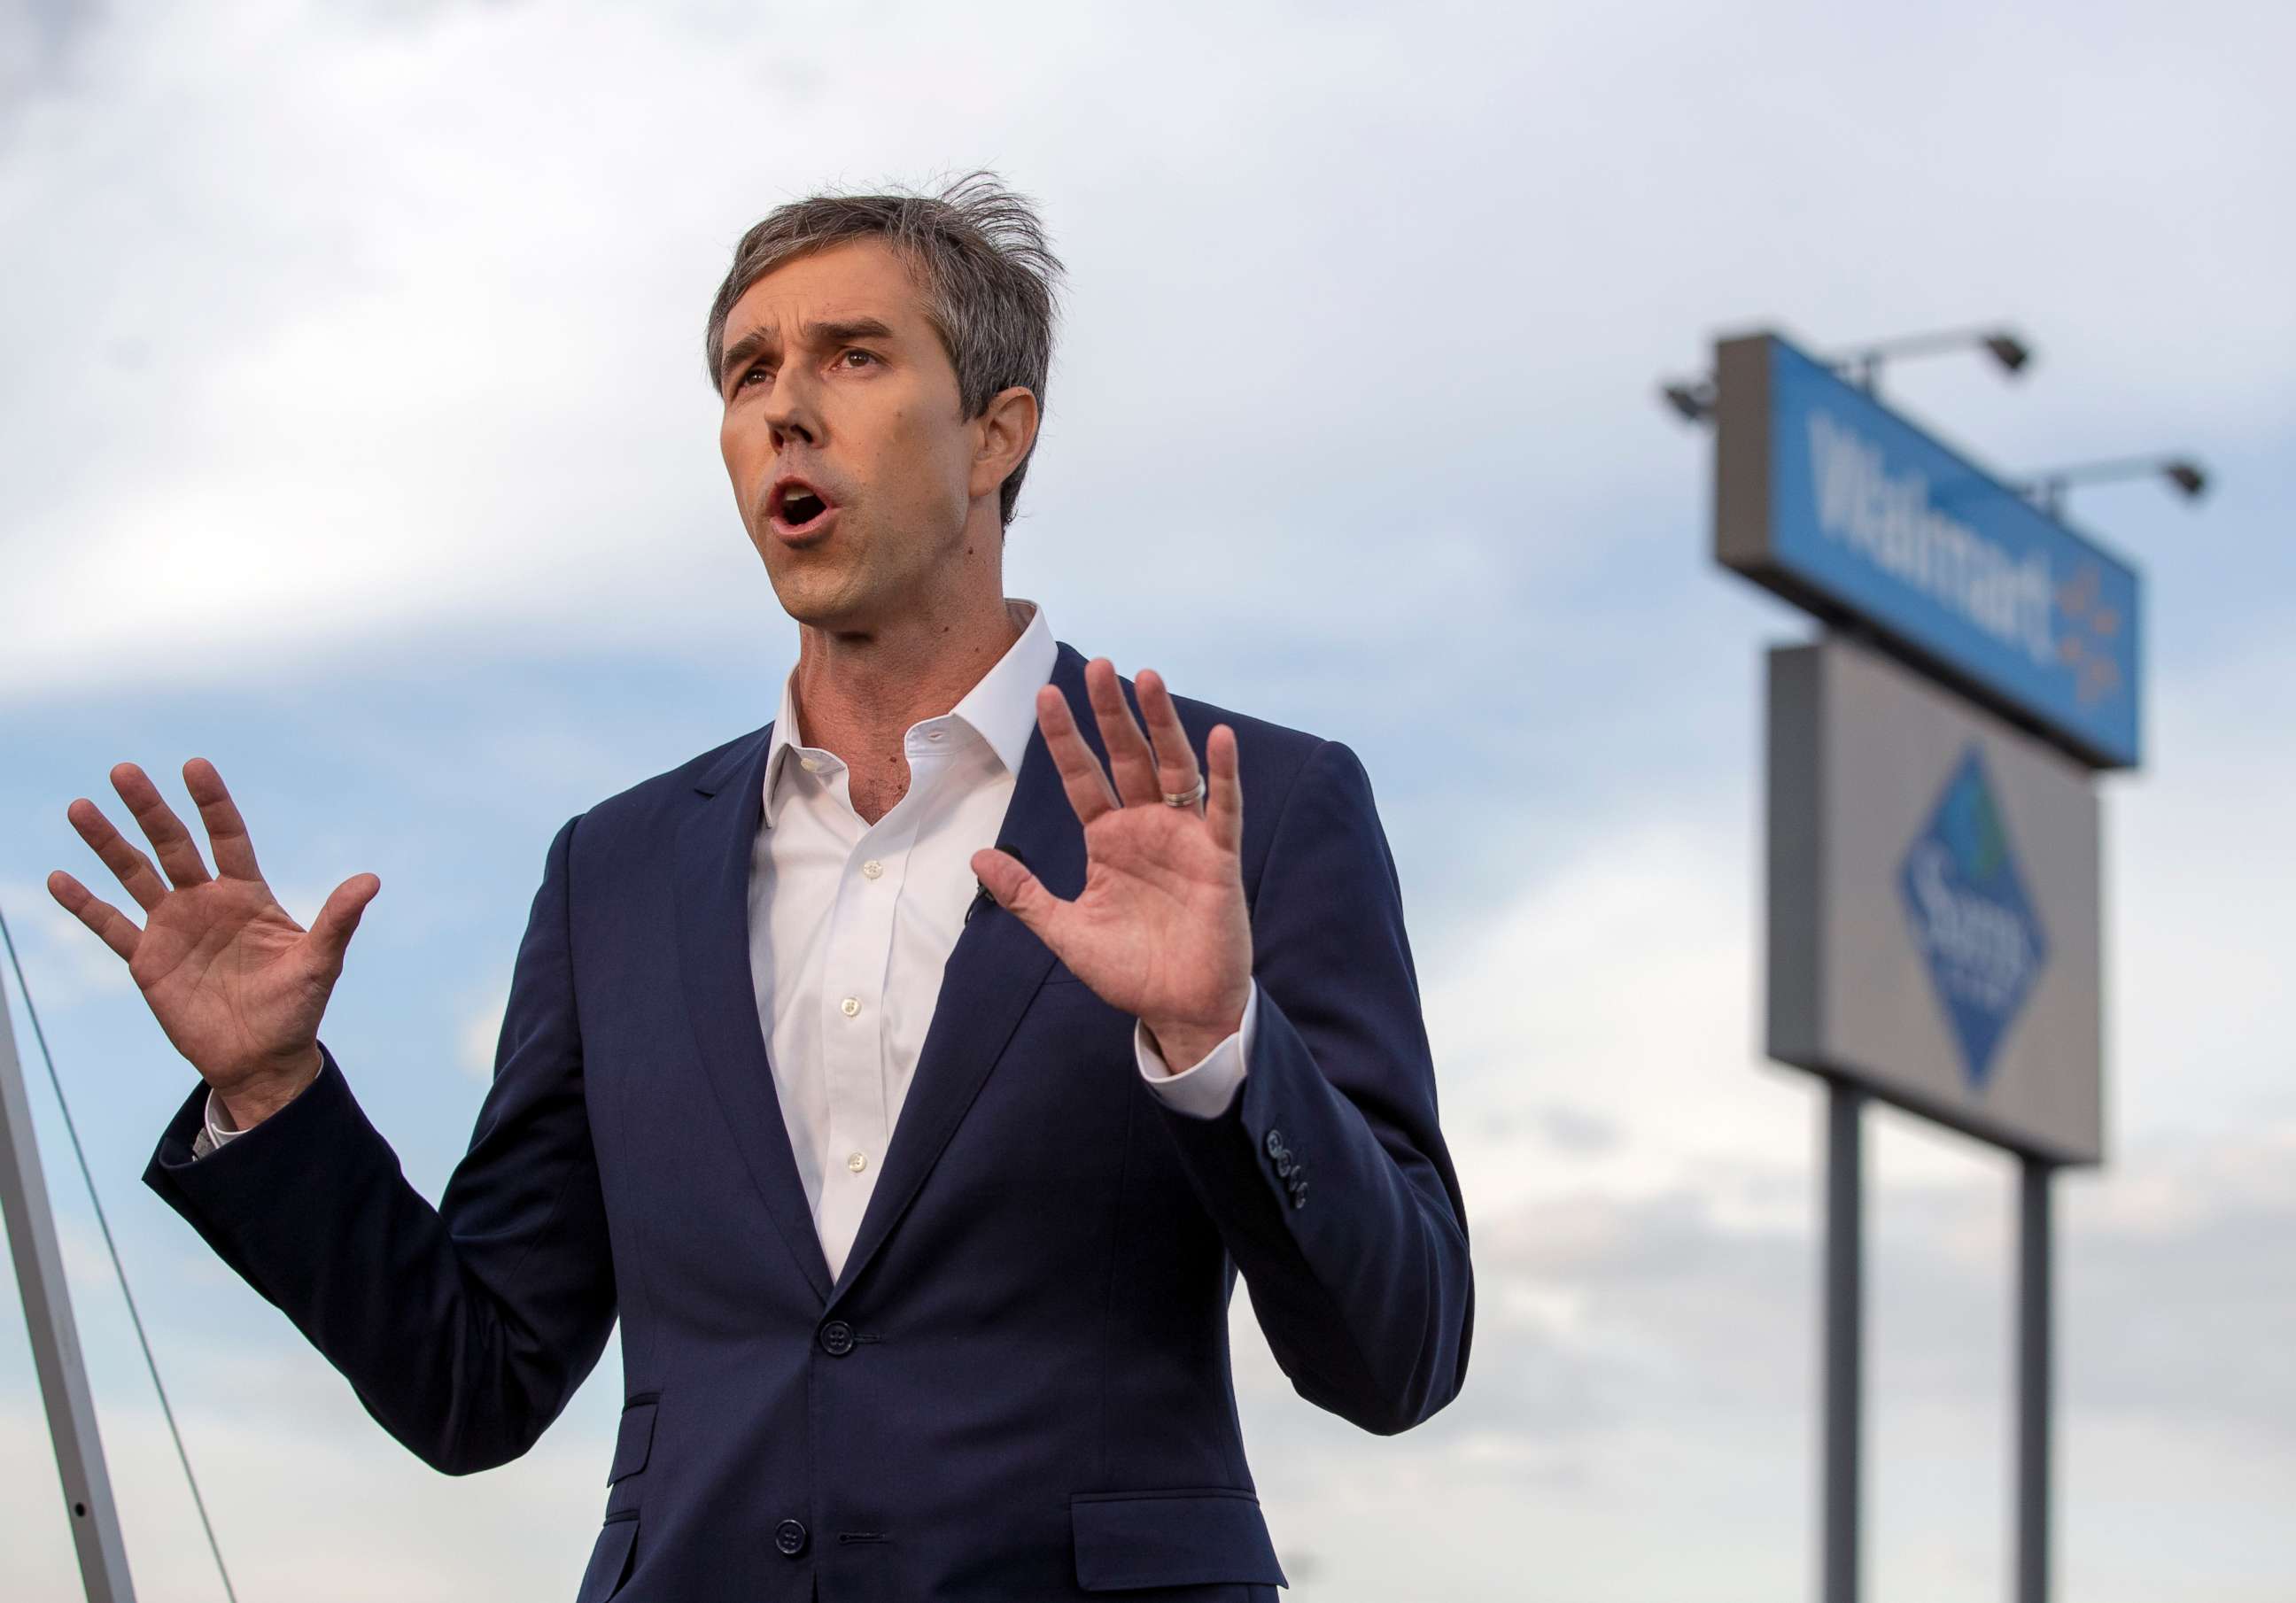 PHOTO: Presidential candidate Beto O'Rourke speaks with the media outside the Walmart store in the aftermath of a mass shooting in El Paso, Texas, Aug. 4, 2019.